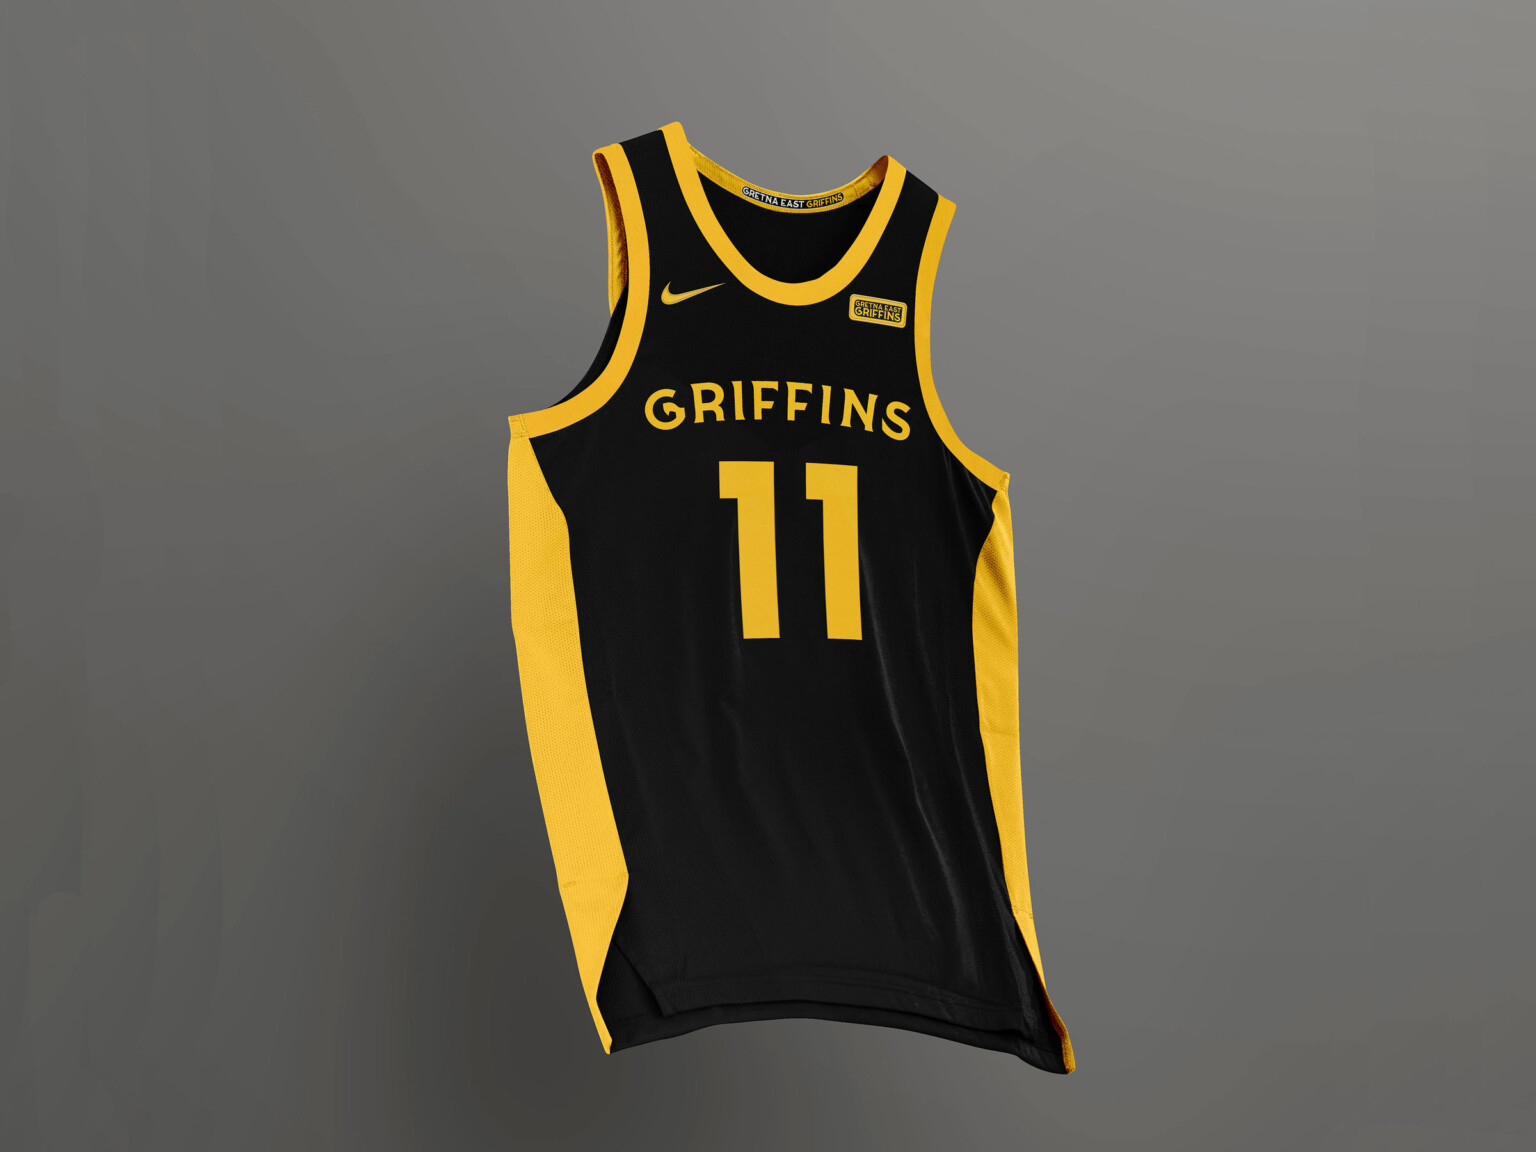 Black basketball jersey with yellow accent side panels and at edges